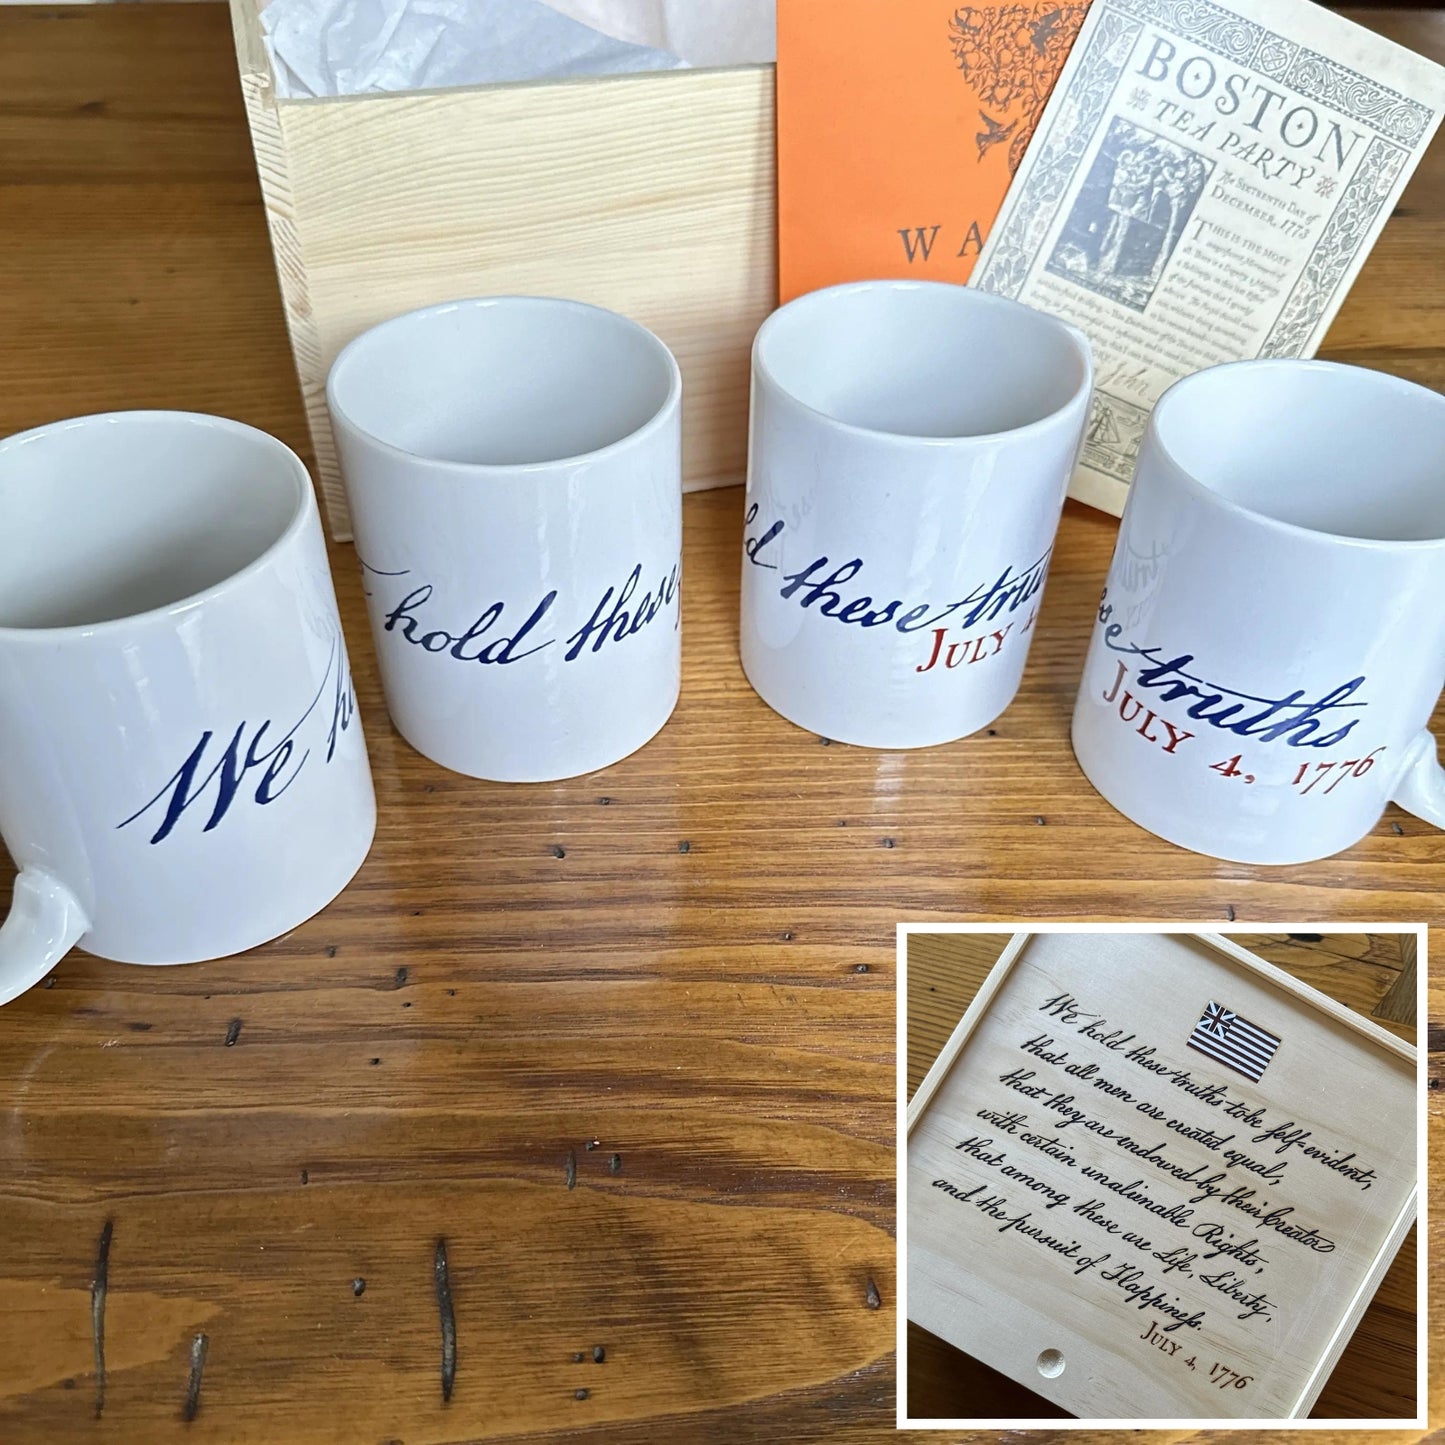 Boxed set with "We hold these truths - July 4, 1776" Mugs and Wassail Tea from The History List store